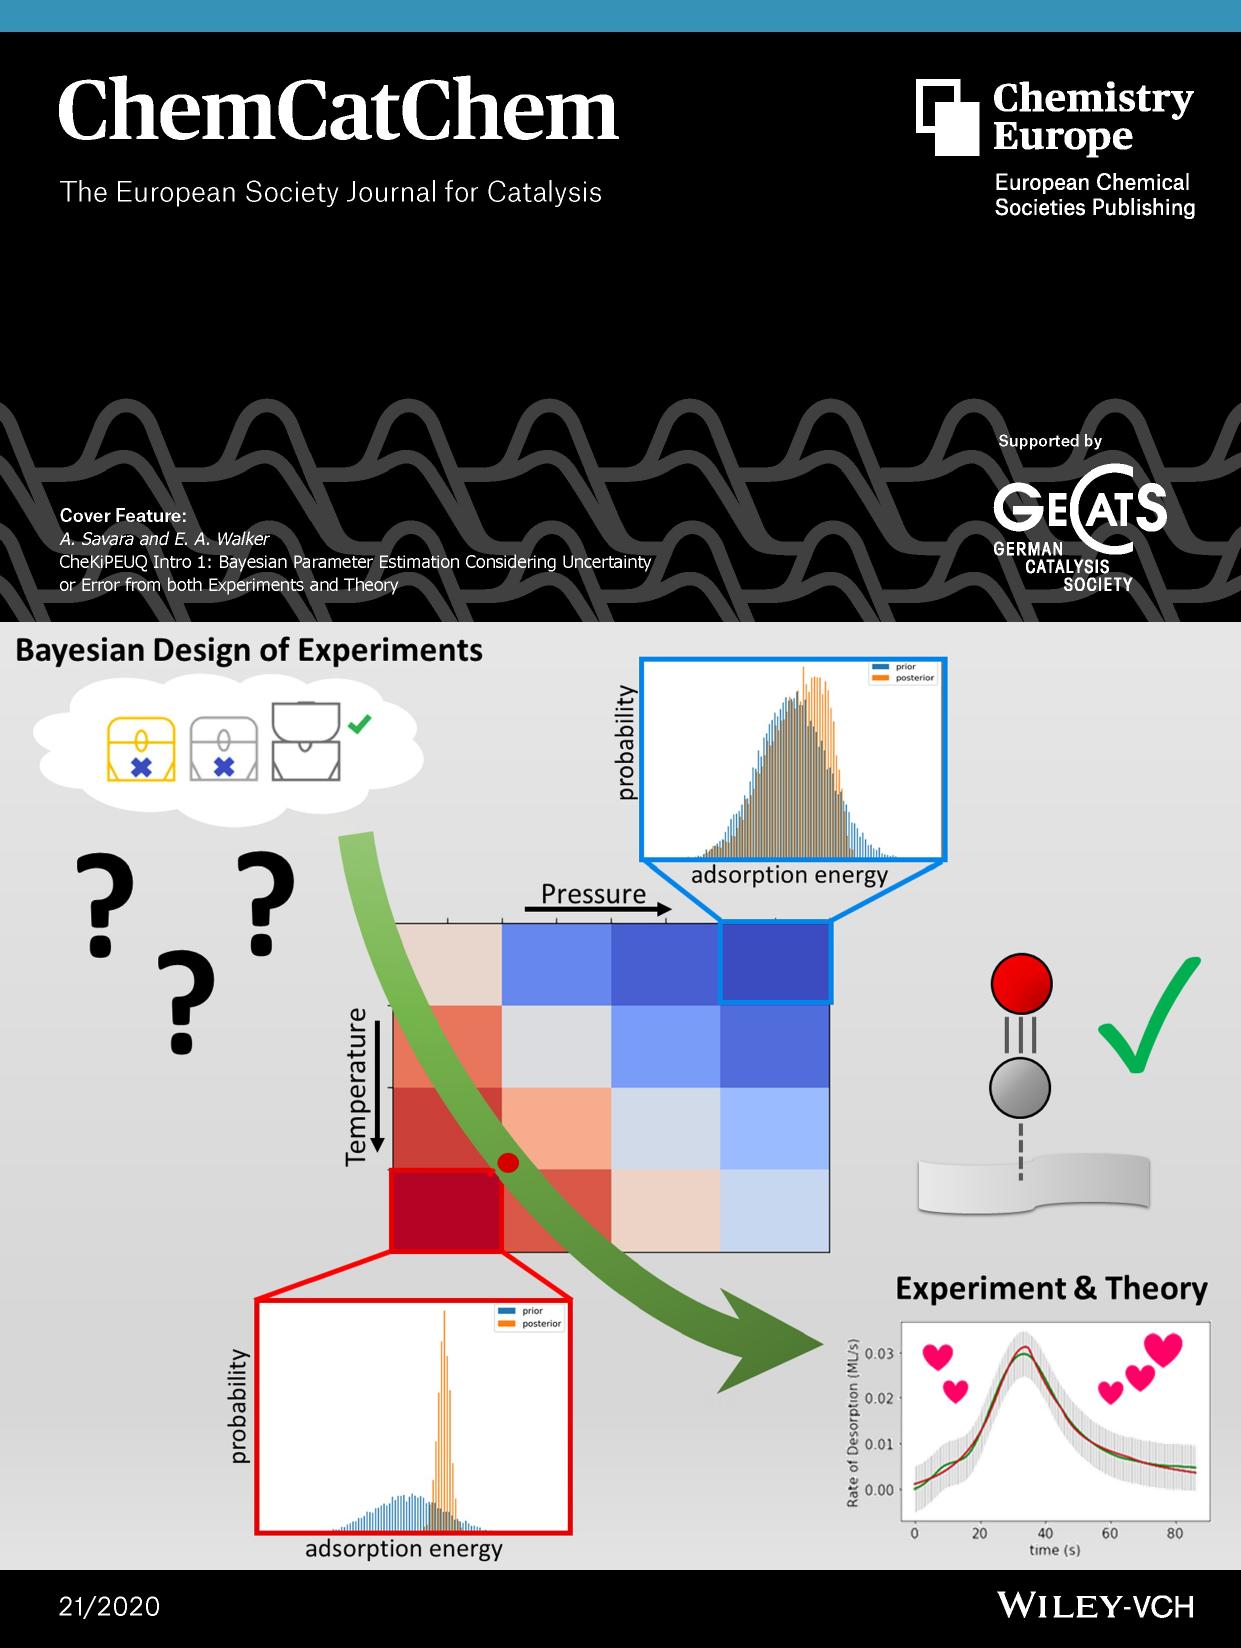 Cover Feature: CheKiPEUQ Intro 1: Bayesian Parameter Estimation Considering Uncertainty or Error from both Experiments and Theory (ChemCatChem 212020) by Unknown